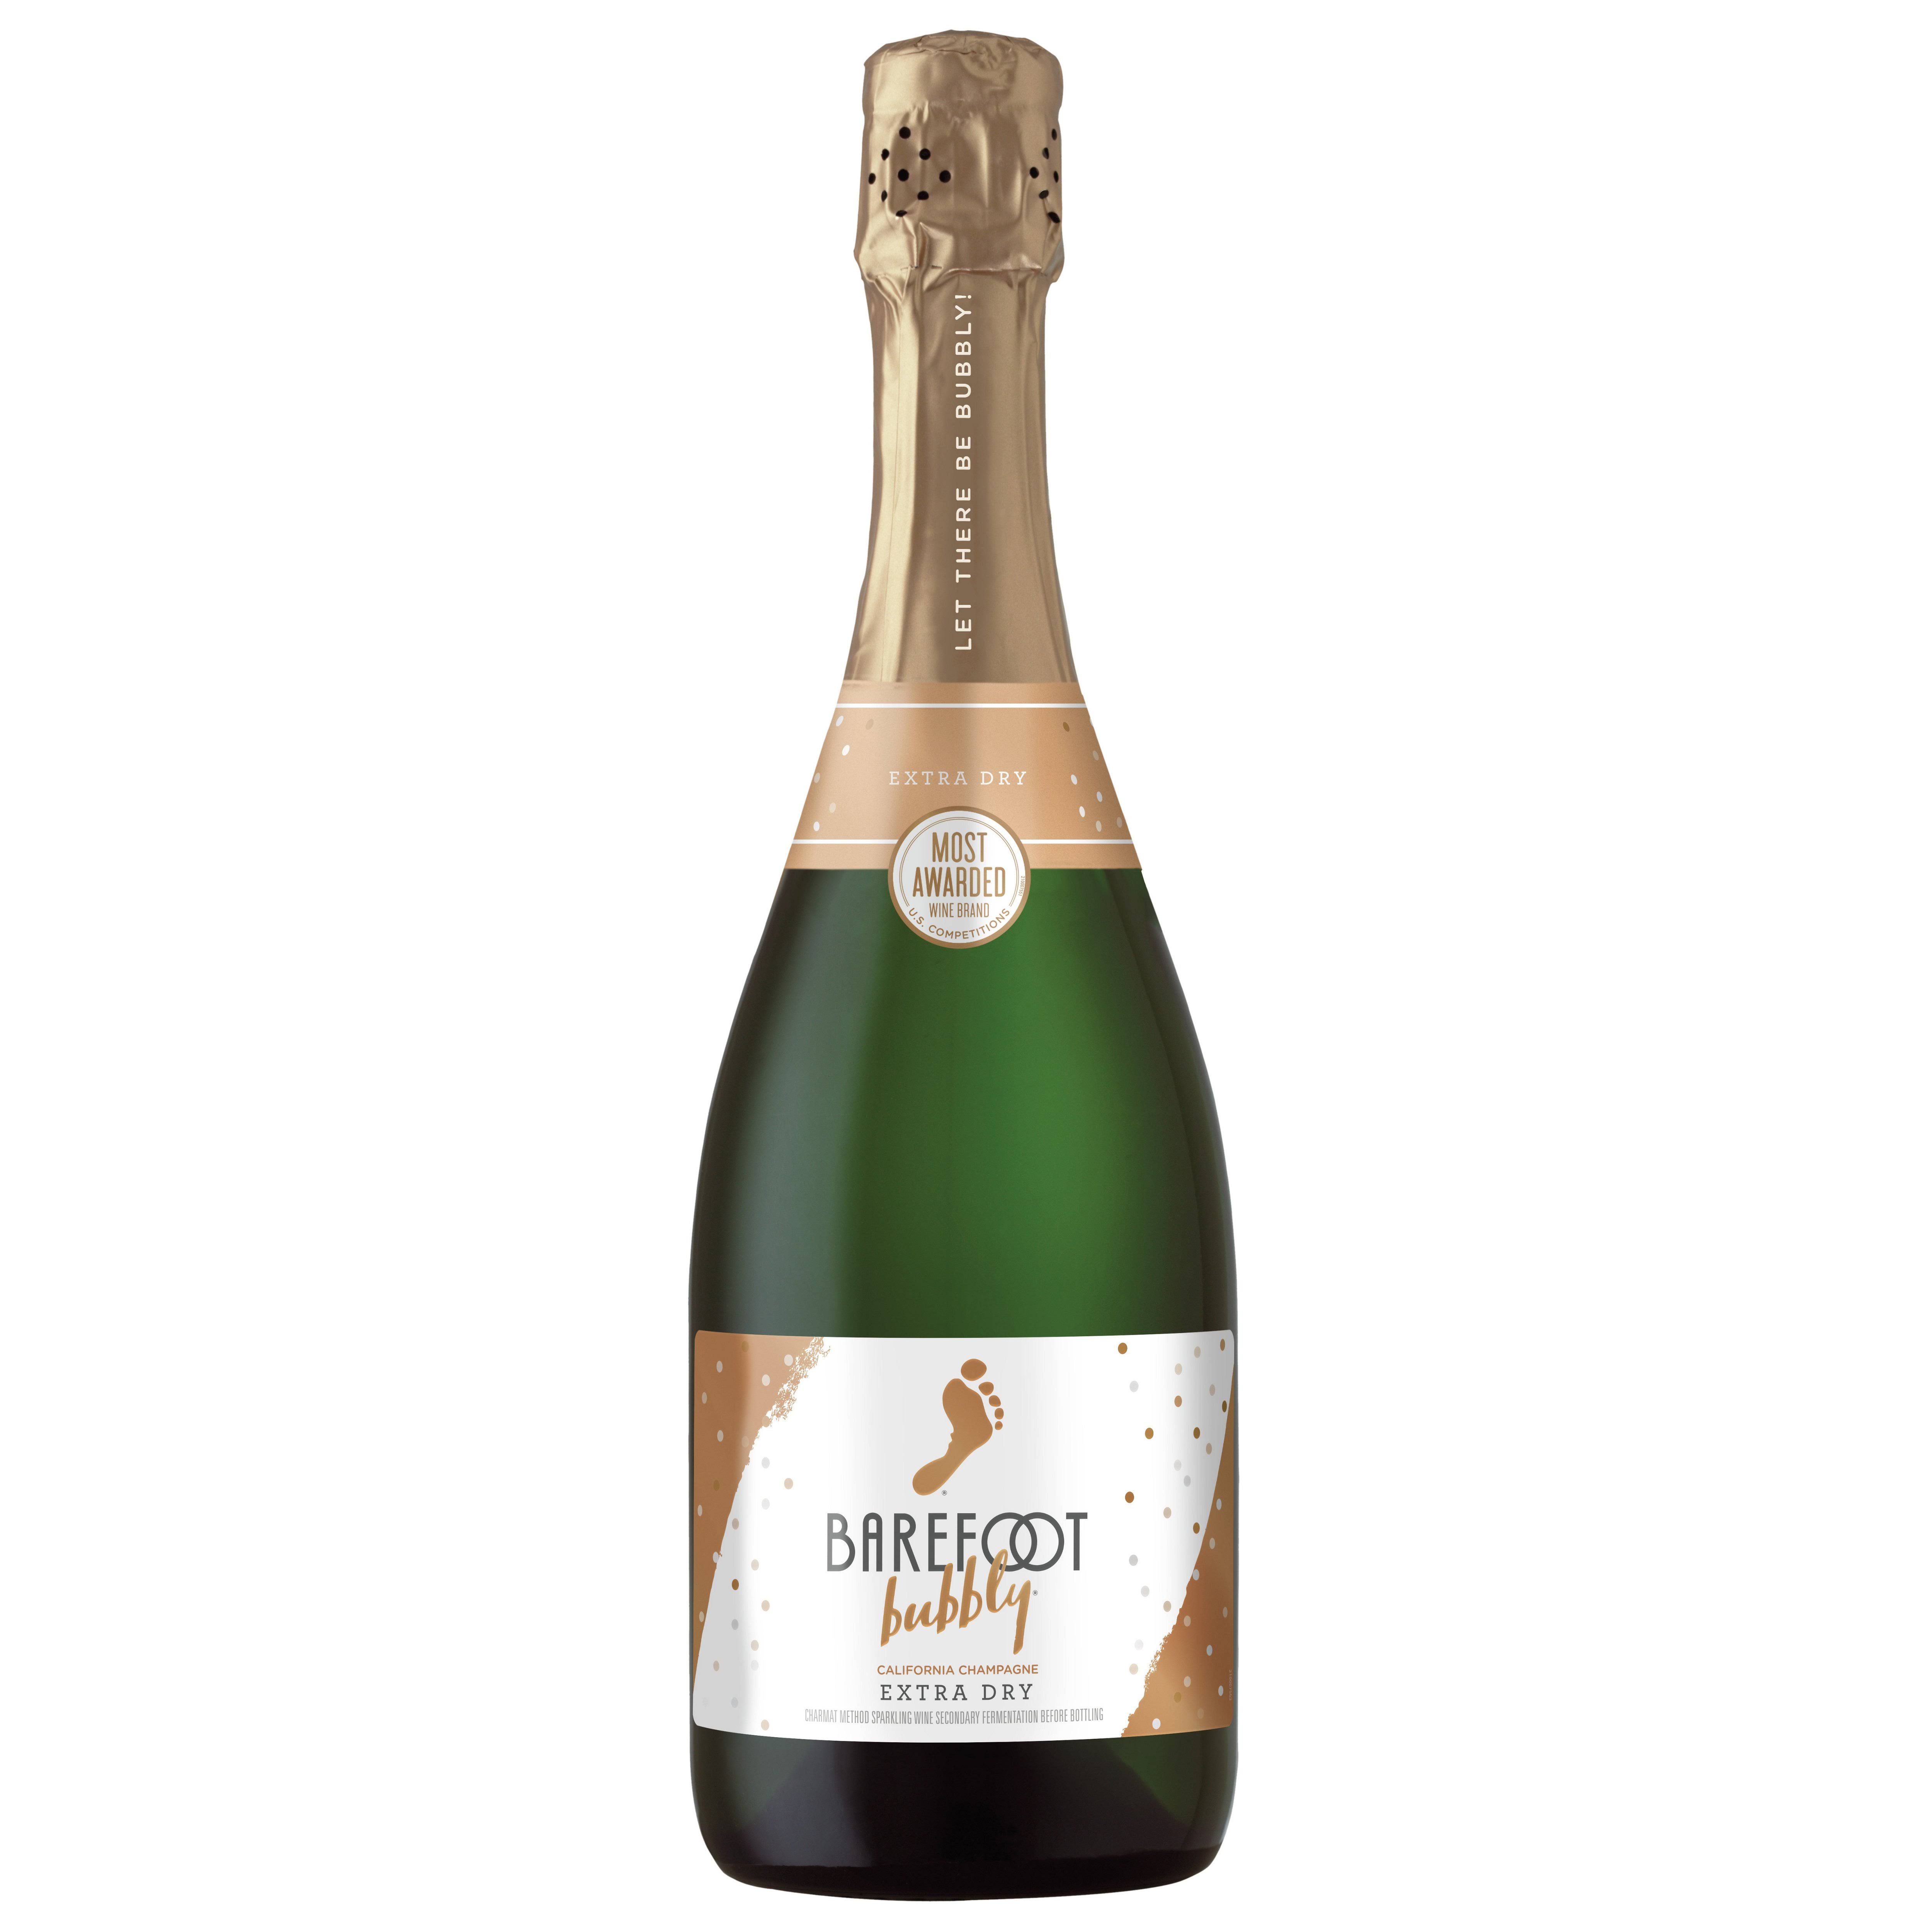 Barefoot Bubbly Champagne - Extra Dry, 750ml